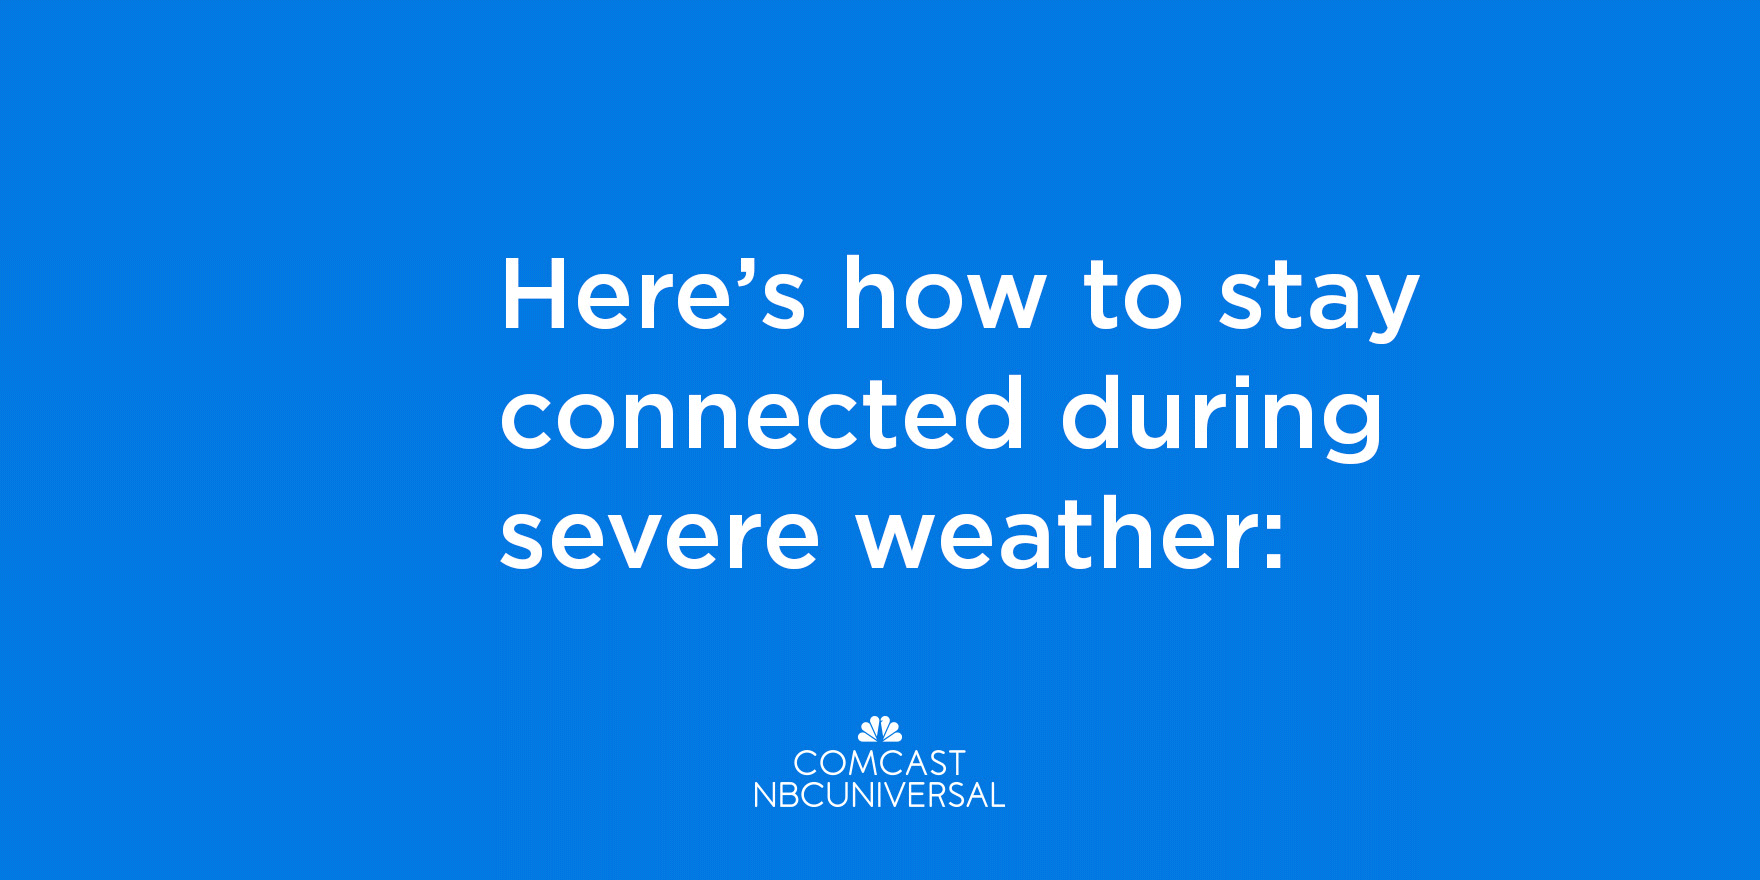 A GIF that instructs customers to use the My Account app, Xfinity WiFi app, and the Xfinity Stream app to stay connected during severe weather.